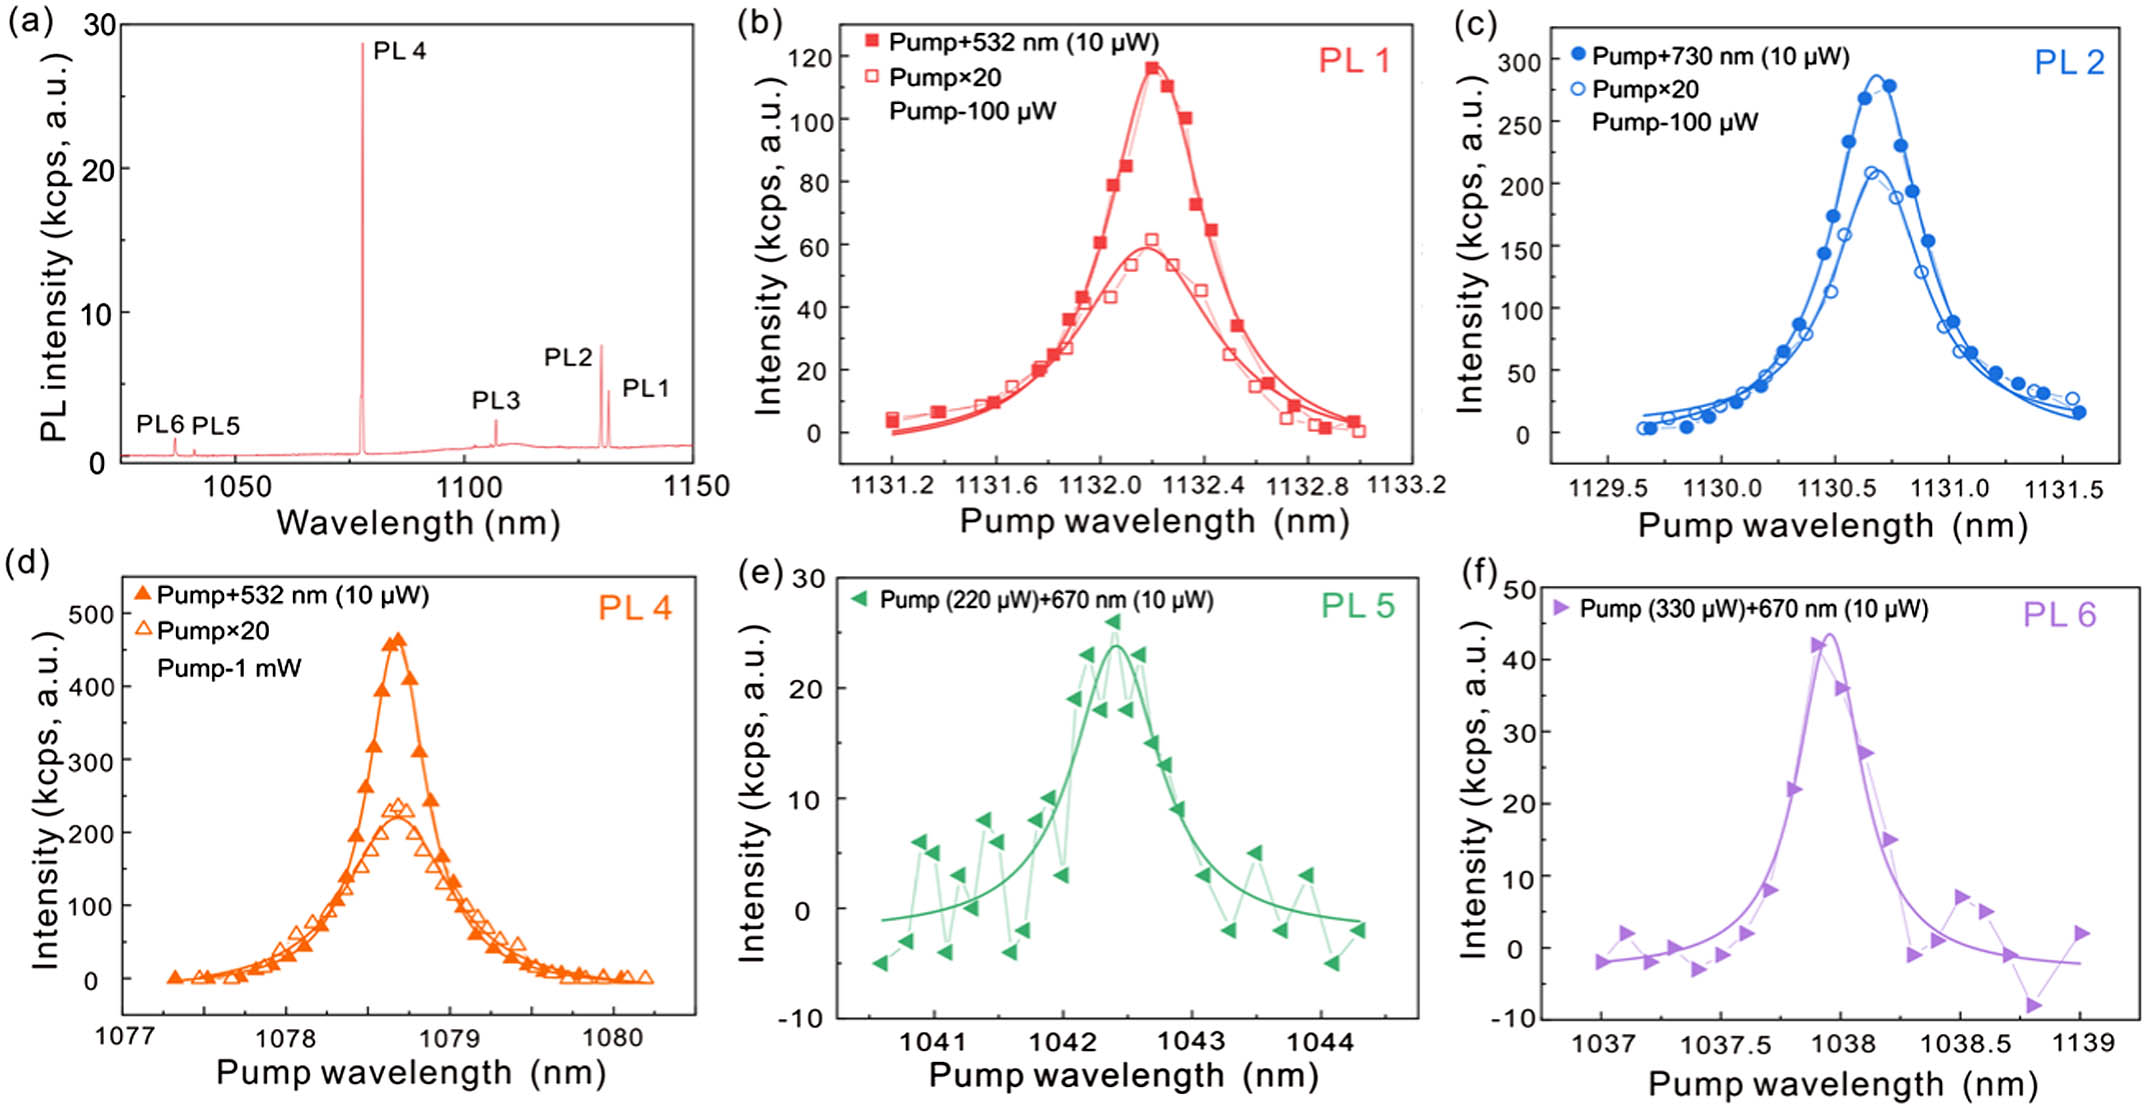 (a) Low-temperature PL spectrum of the divacancies in 4H-SiC. Low-temperature PLE resonant scan for divacancy (b) PL1, (c) PL2, (d) PL4, (e) PL5, and (f) PL6. The solid and hollow symbols are the experimental results under repump and pure PLE excitation, respectively. The PLE spectra are fit using Lorentz functions.